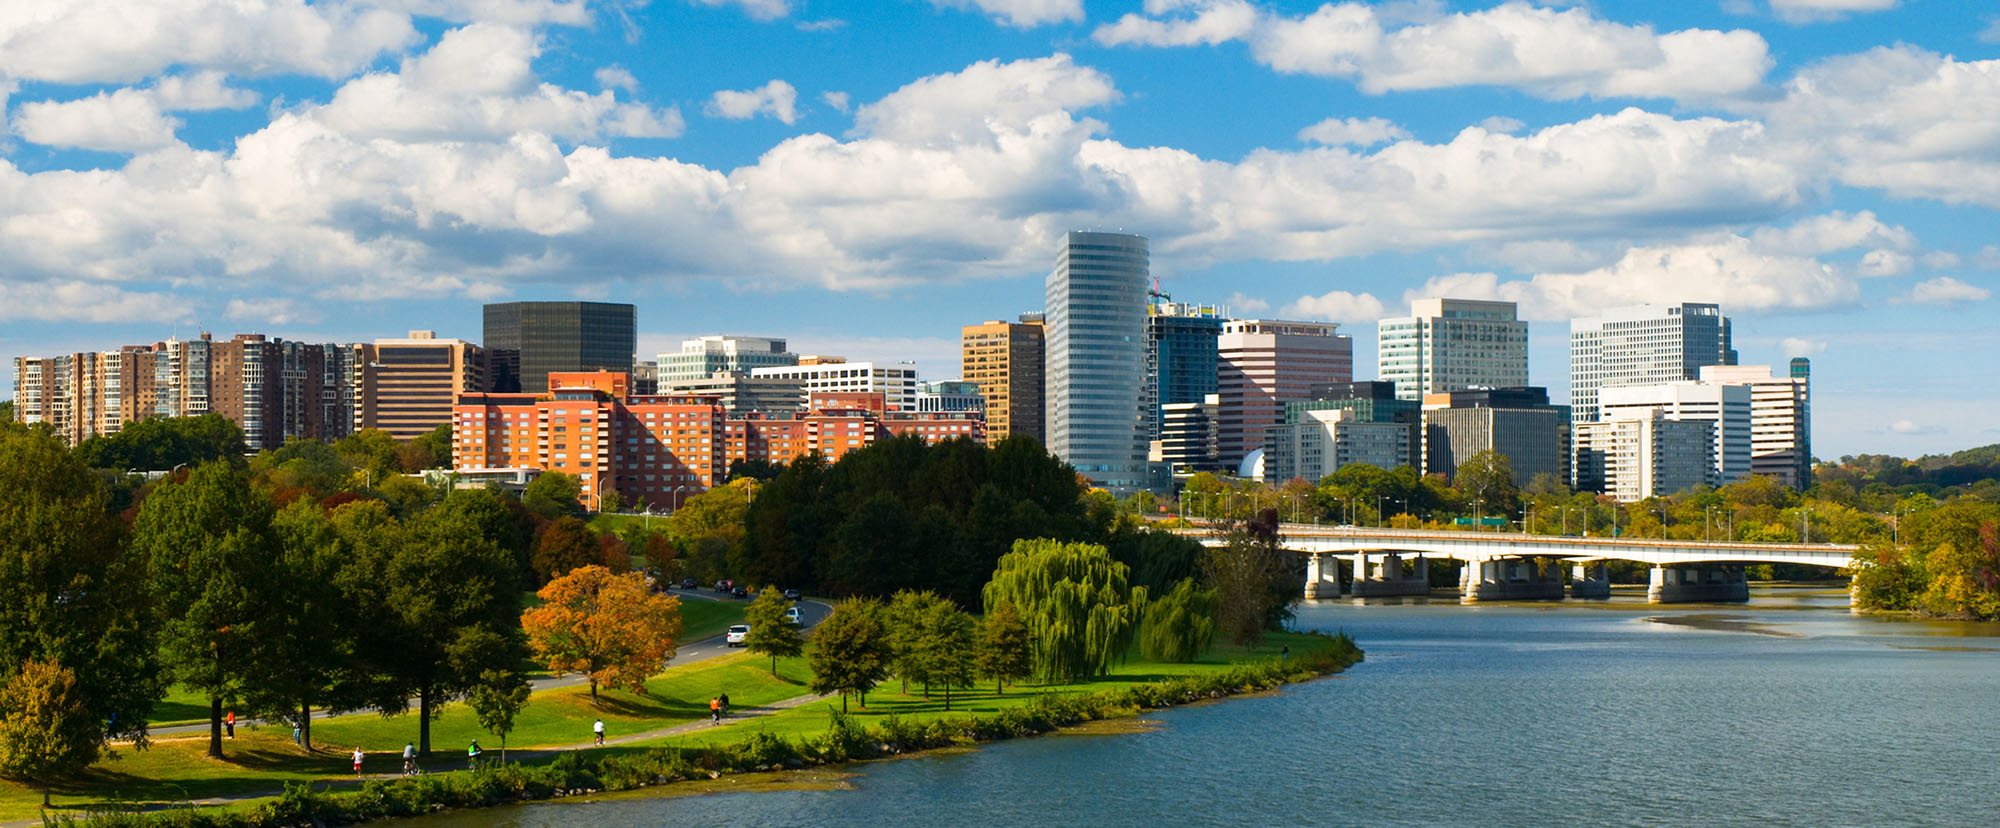 A park and river is pictured with sky scrapers and a blue sky in the background. EcoScribe provides remote deposition in Boston.